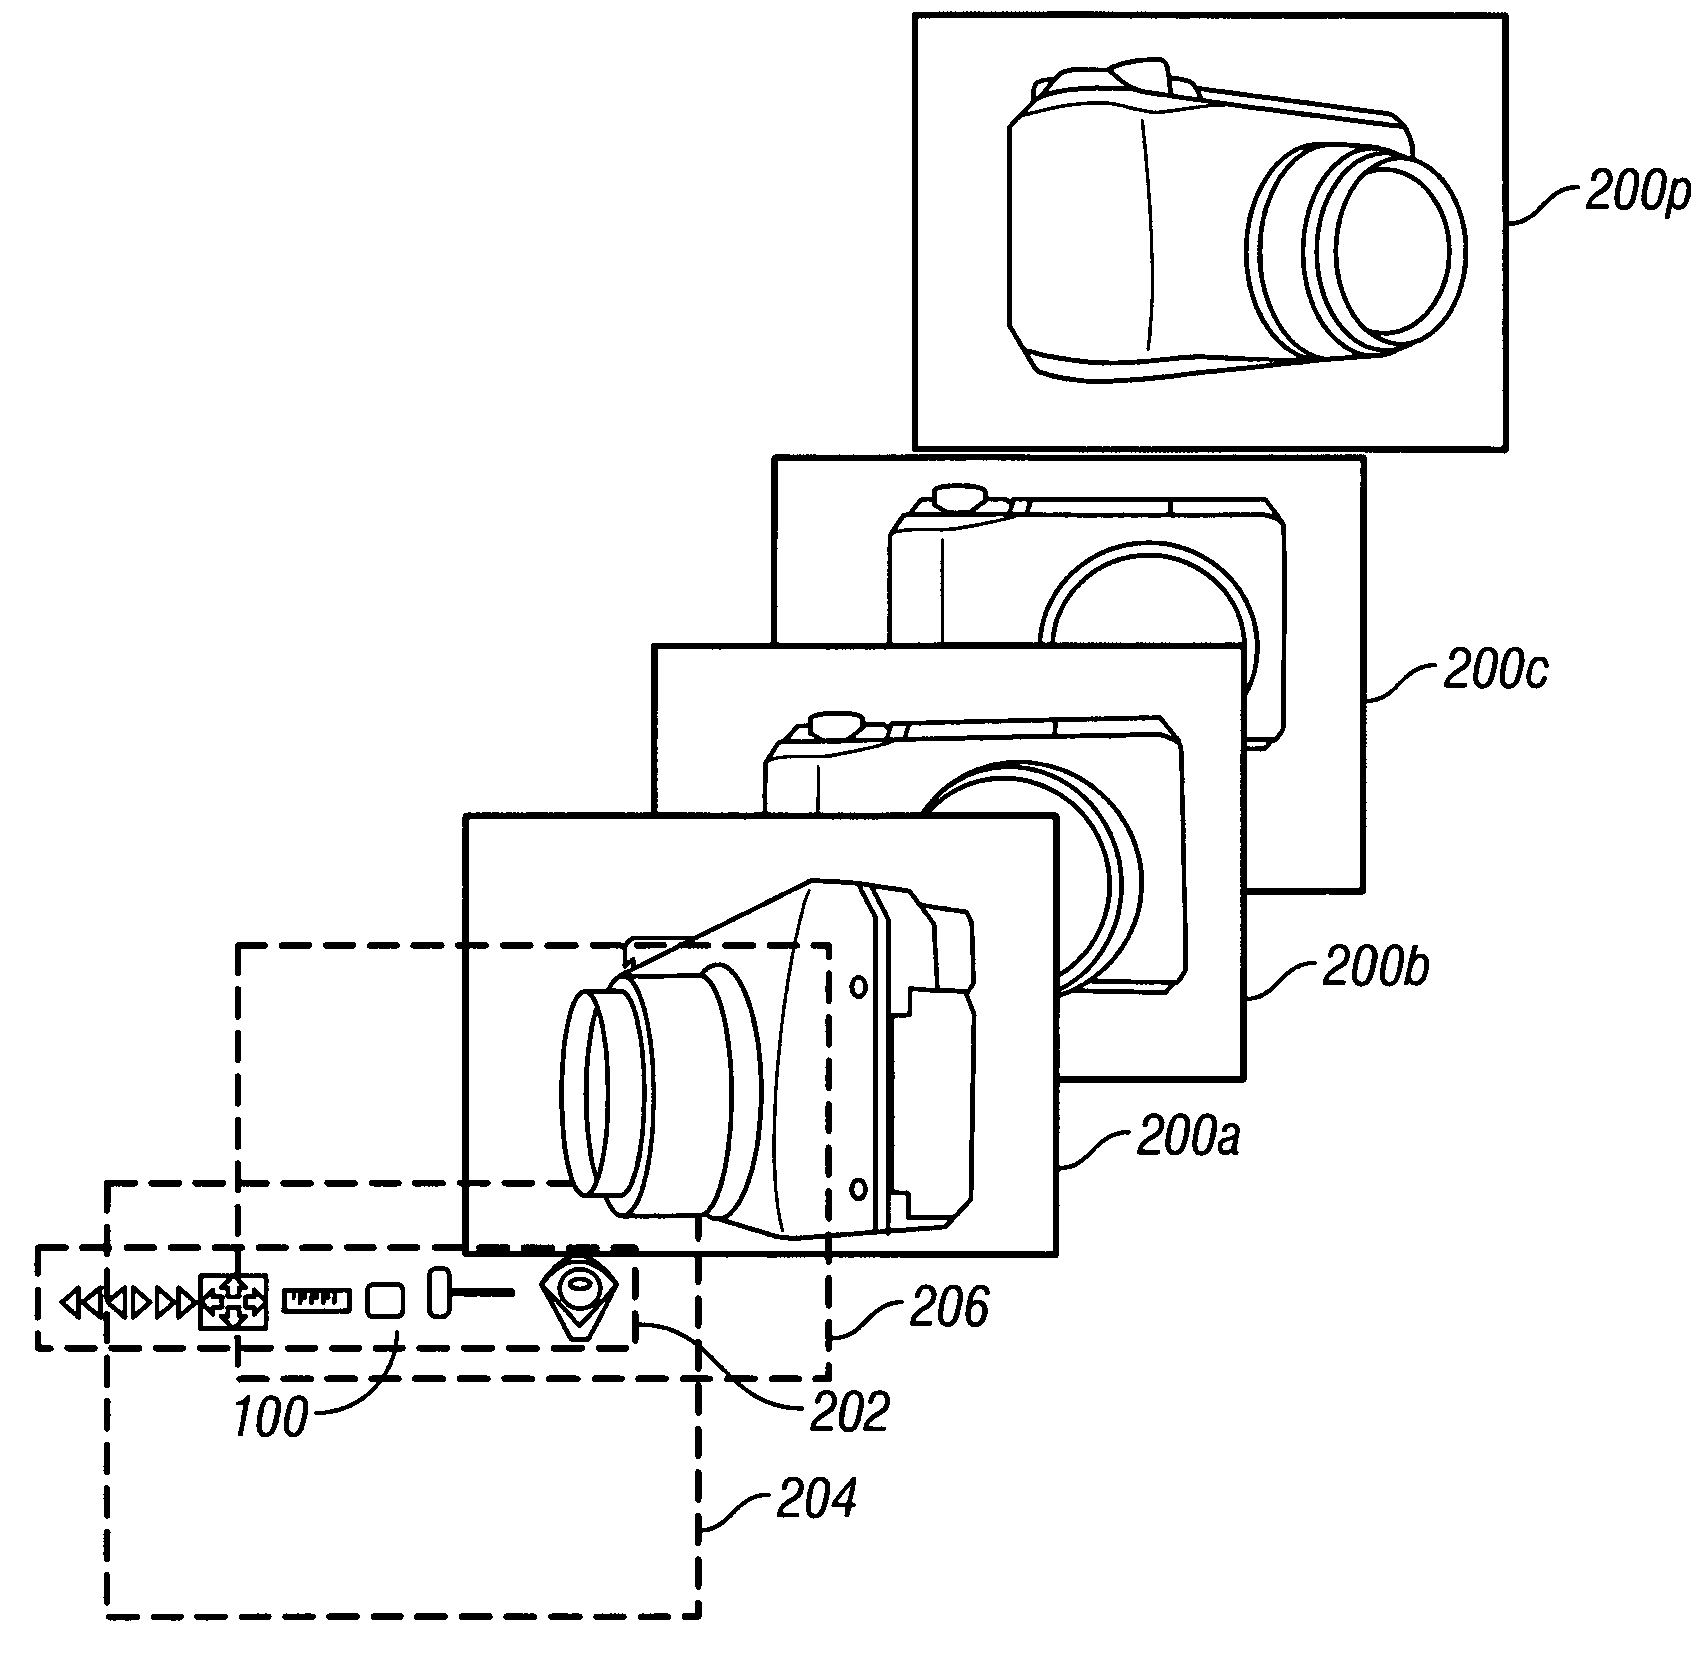 System for delivering and enabling interactivity with images